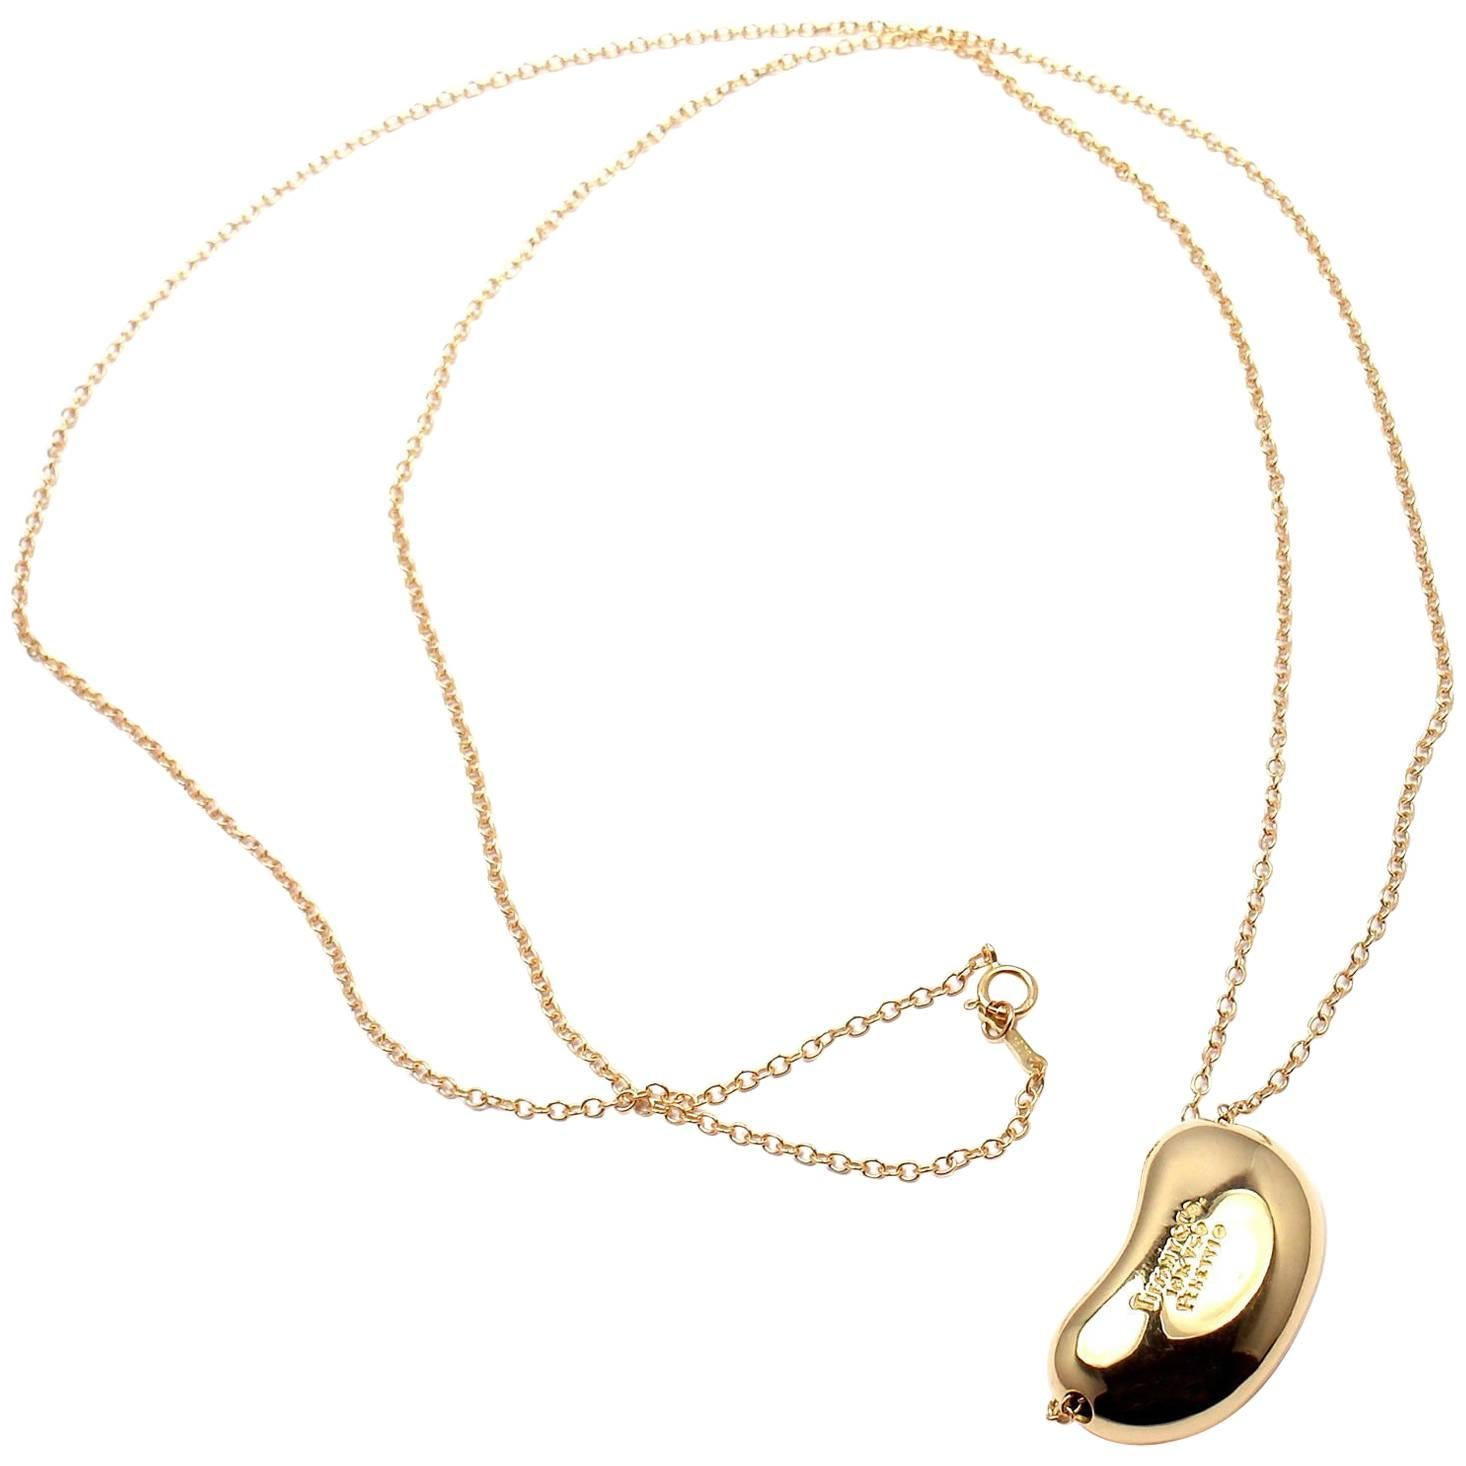 Tiffany & Co. Elsa Peretti Large Bean Yellow Gold Chain Necklace